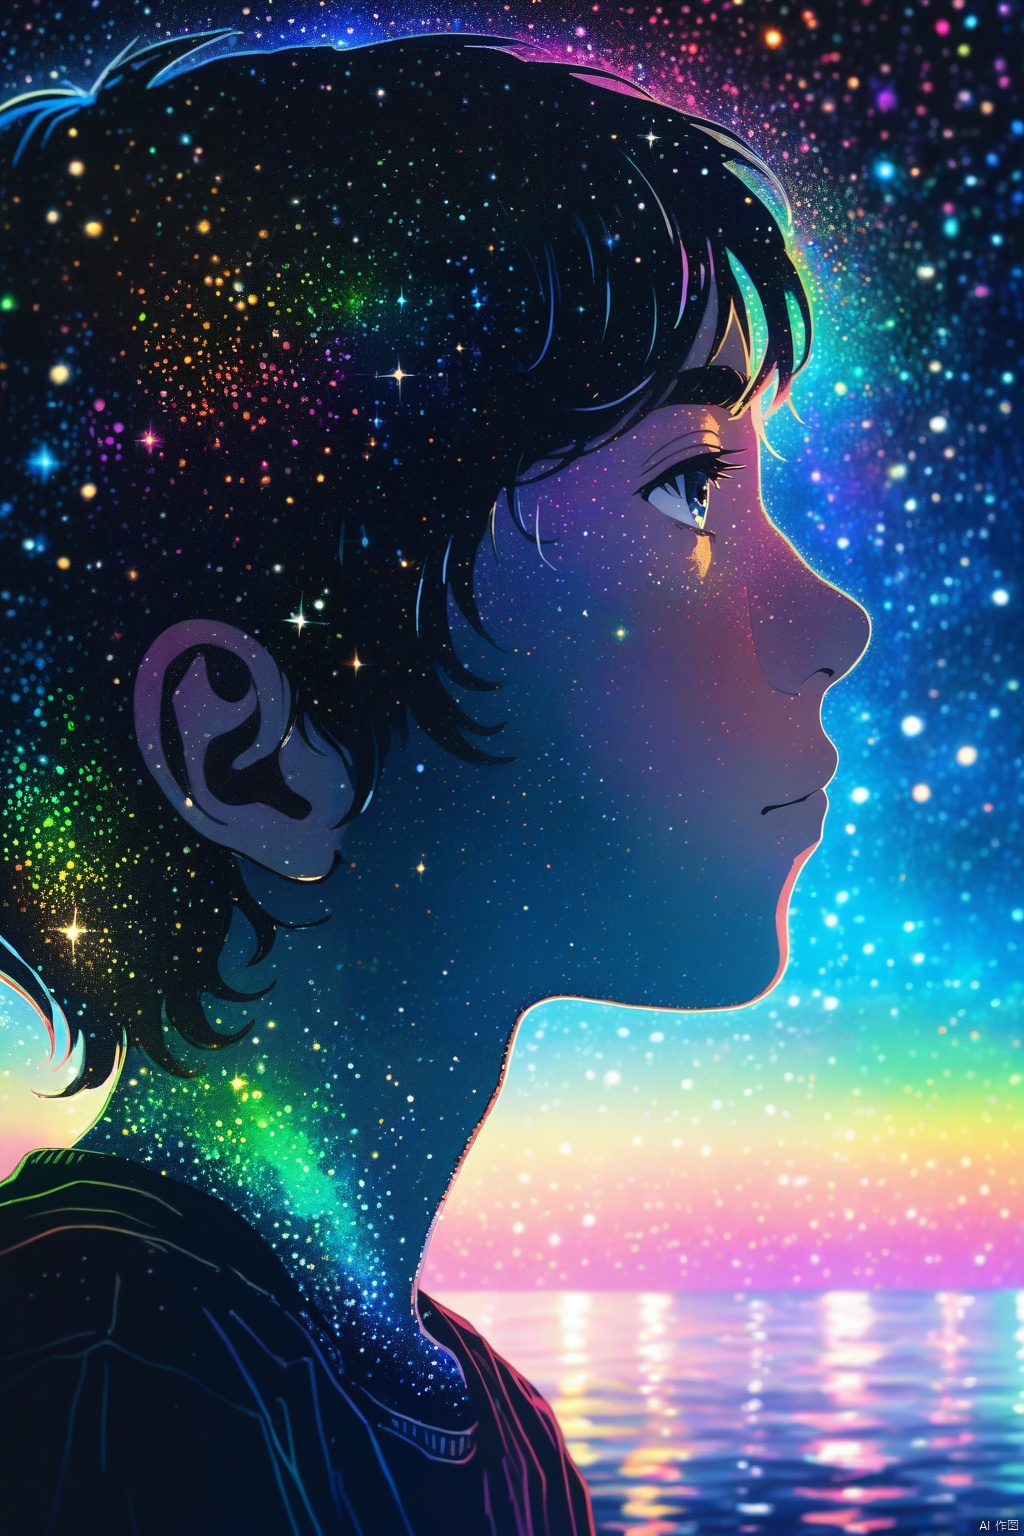  1 boy, closeup, portrait, upper body, face from side, on the sea, under the starry sky, the sea reflects the starry sky, rainbow color light reflected on the boy's face, sparkling lights, magical atmosphere, pointillism, Silhouette view, Cosmic wonders, Mysterious and colorful, nebula light, cosmic light, galactic light, Astronomical view, Macroscopic perspective, perspective view, masterpiece,